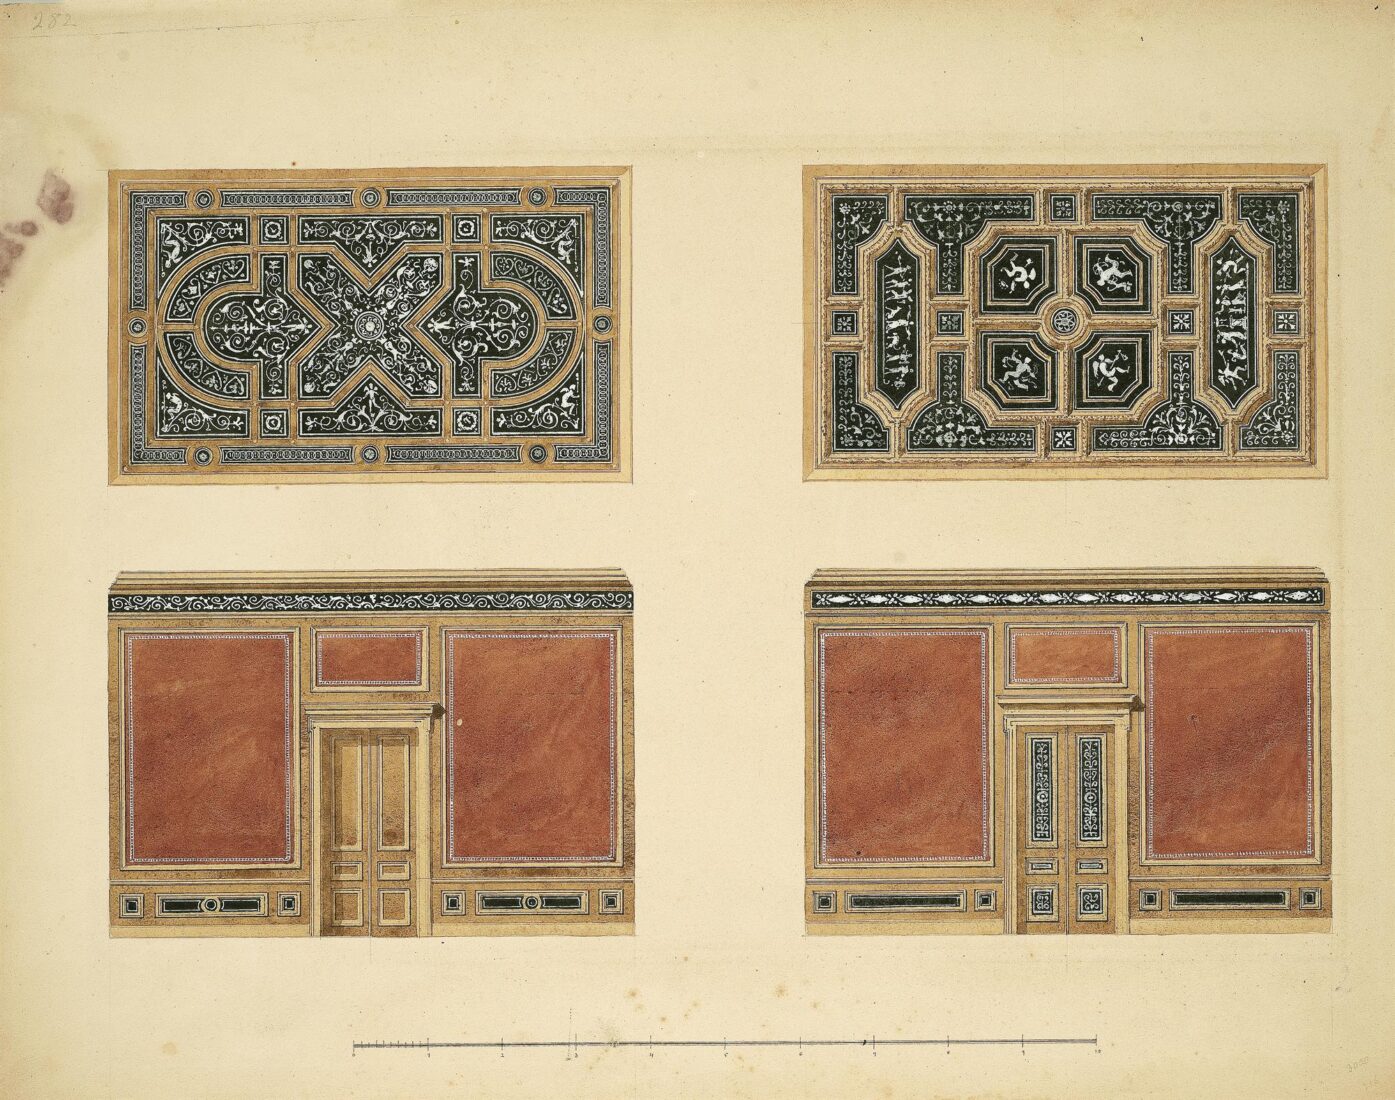 Wall and Ceiling Decorations for a Mansion - Ziller Ernst